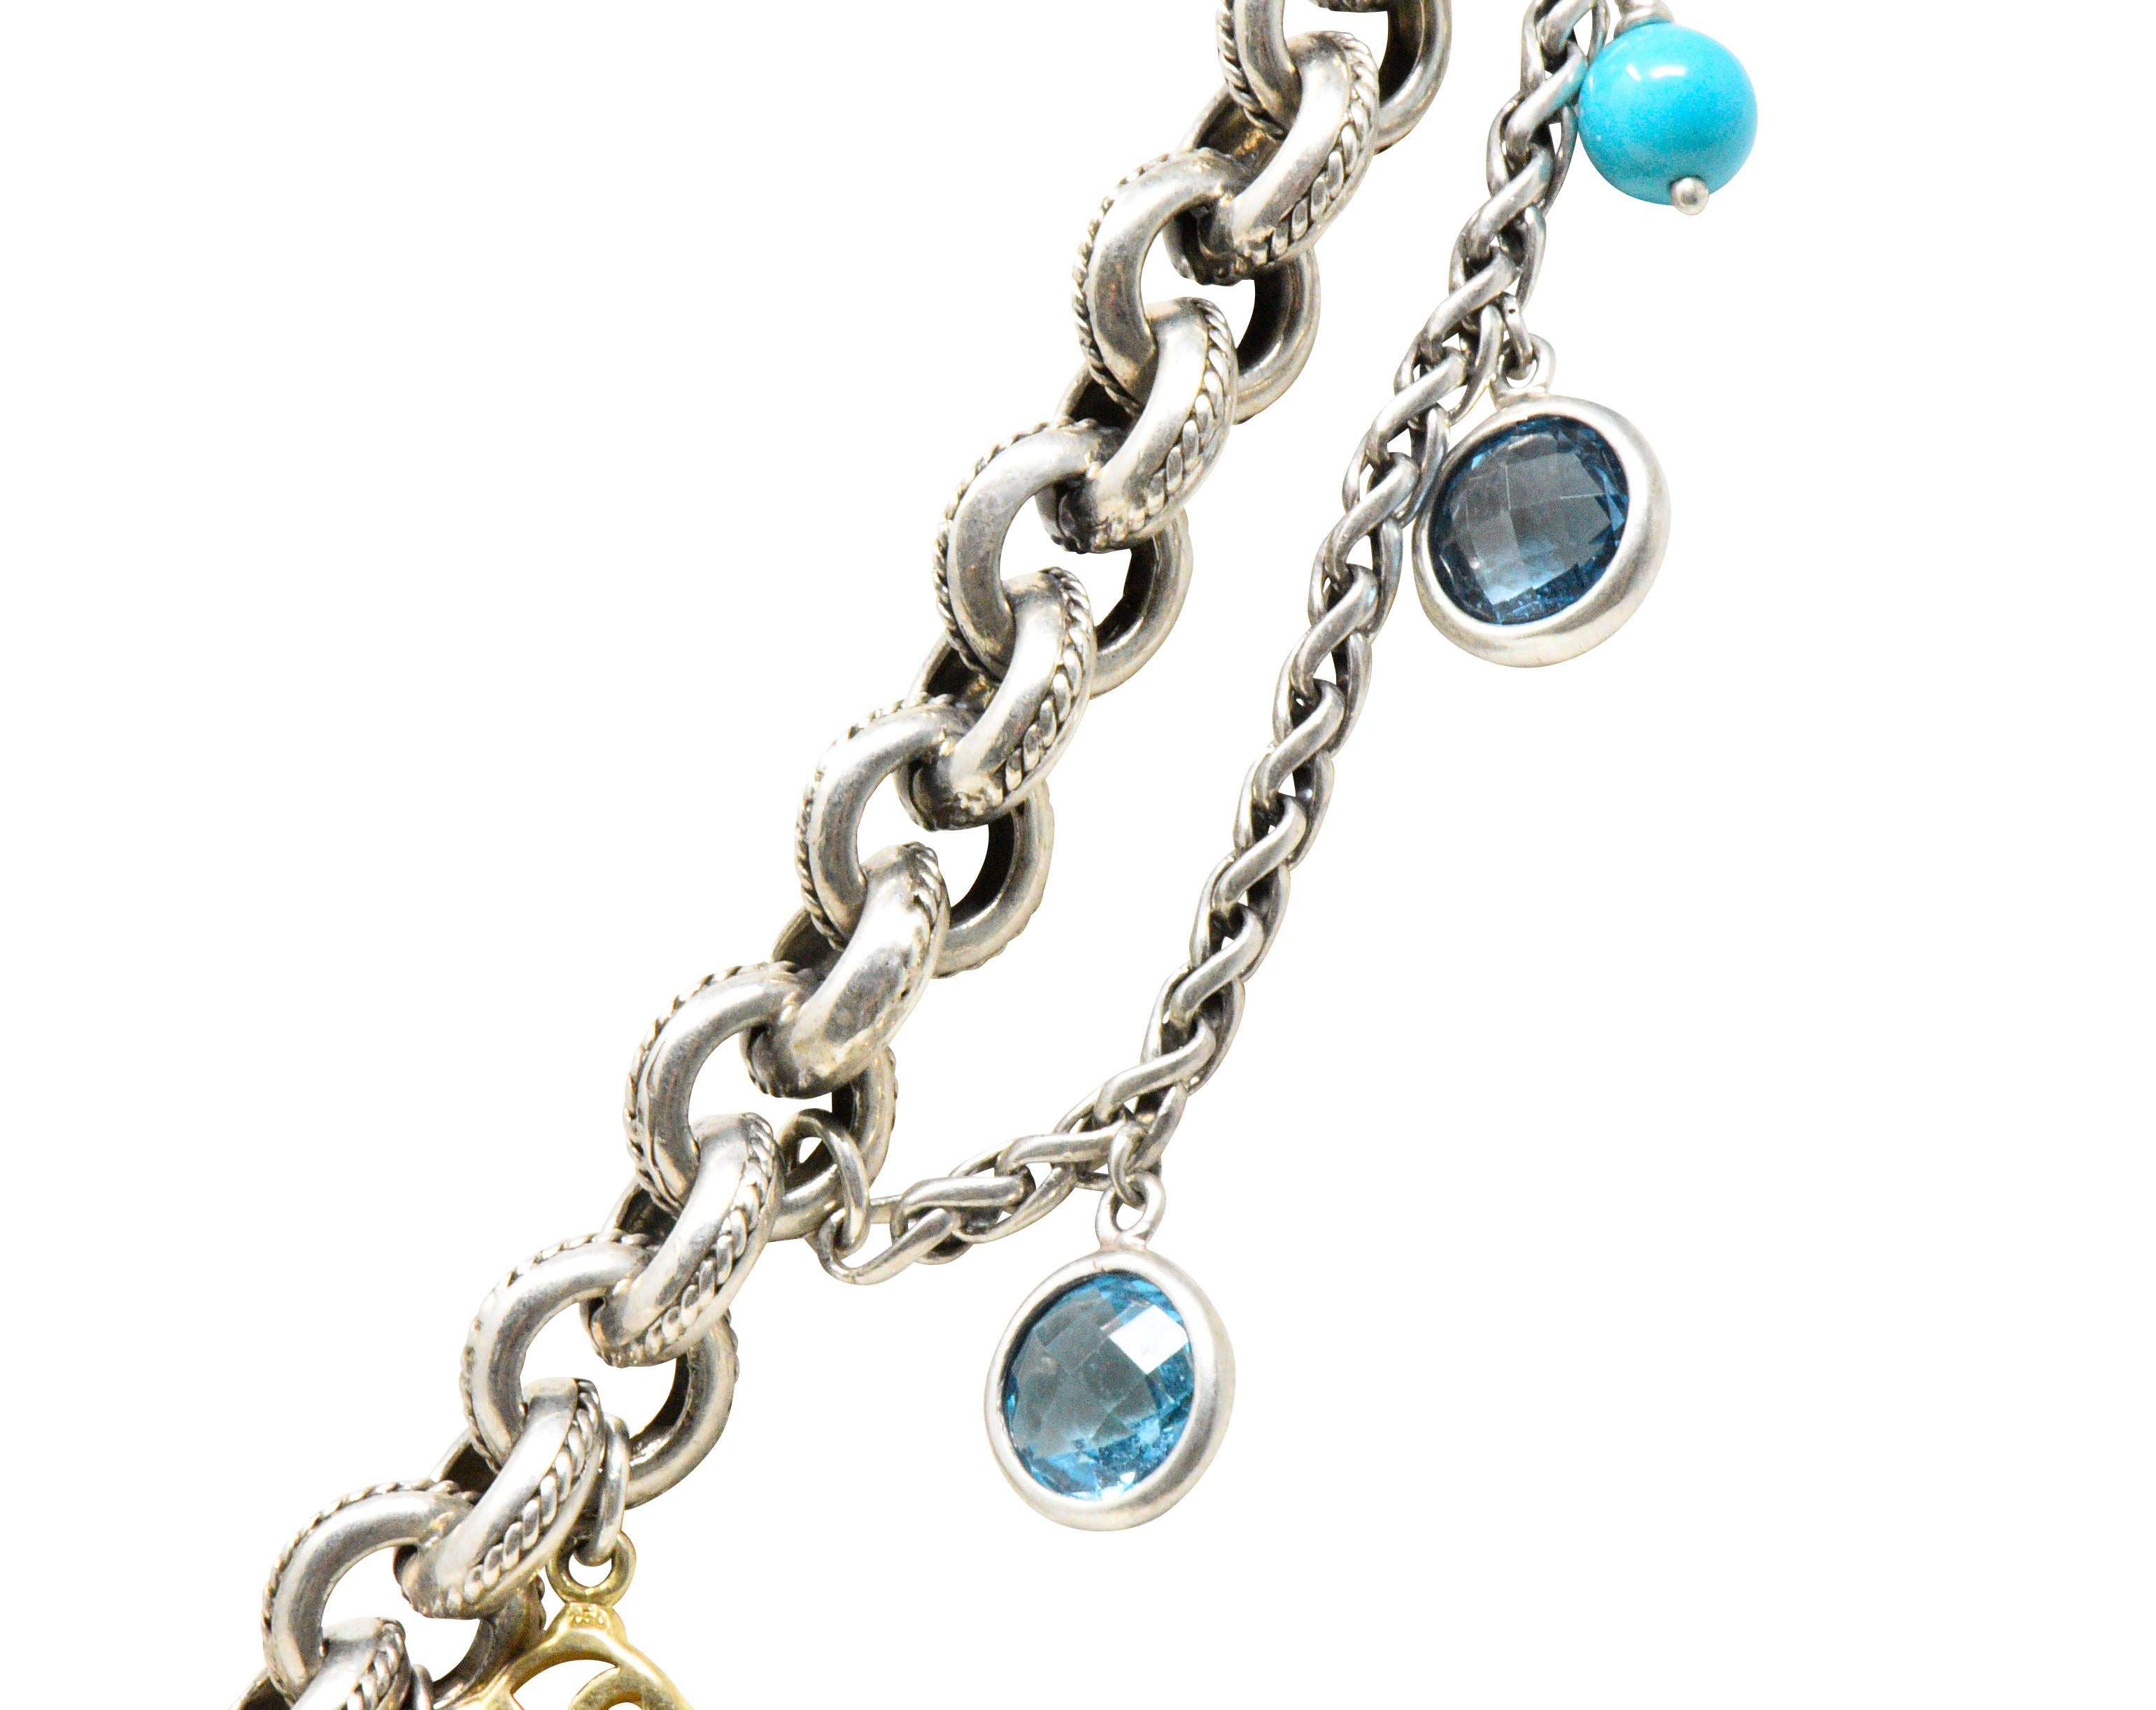 Contemporary David Yurman Topaz Pearl Turquoise 18 Karat Yellow Gold Sterling Silver Necklace